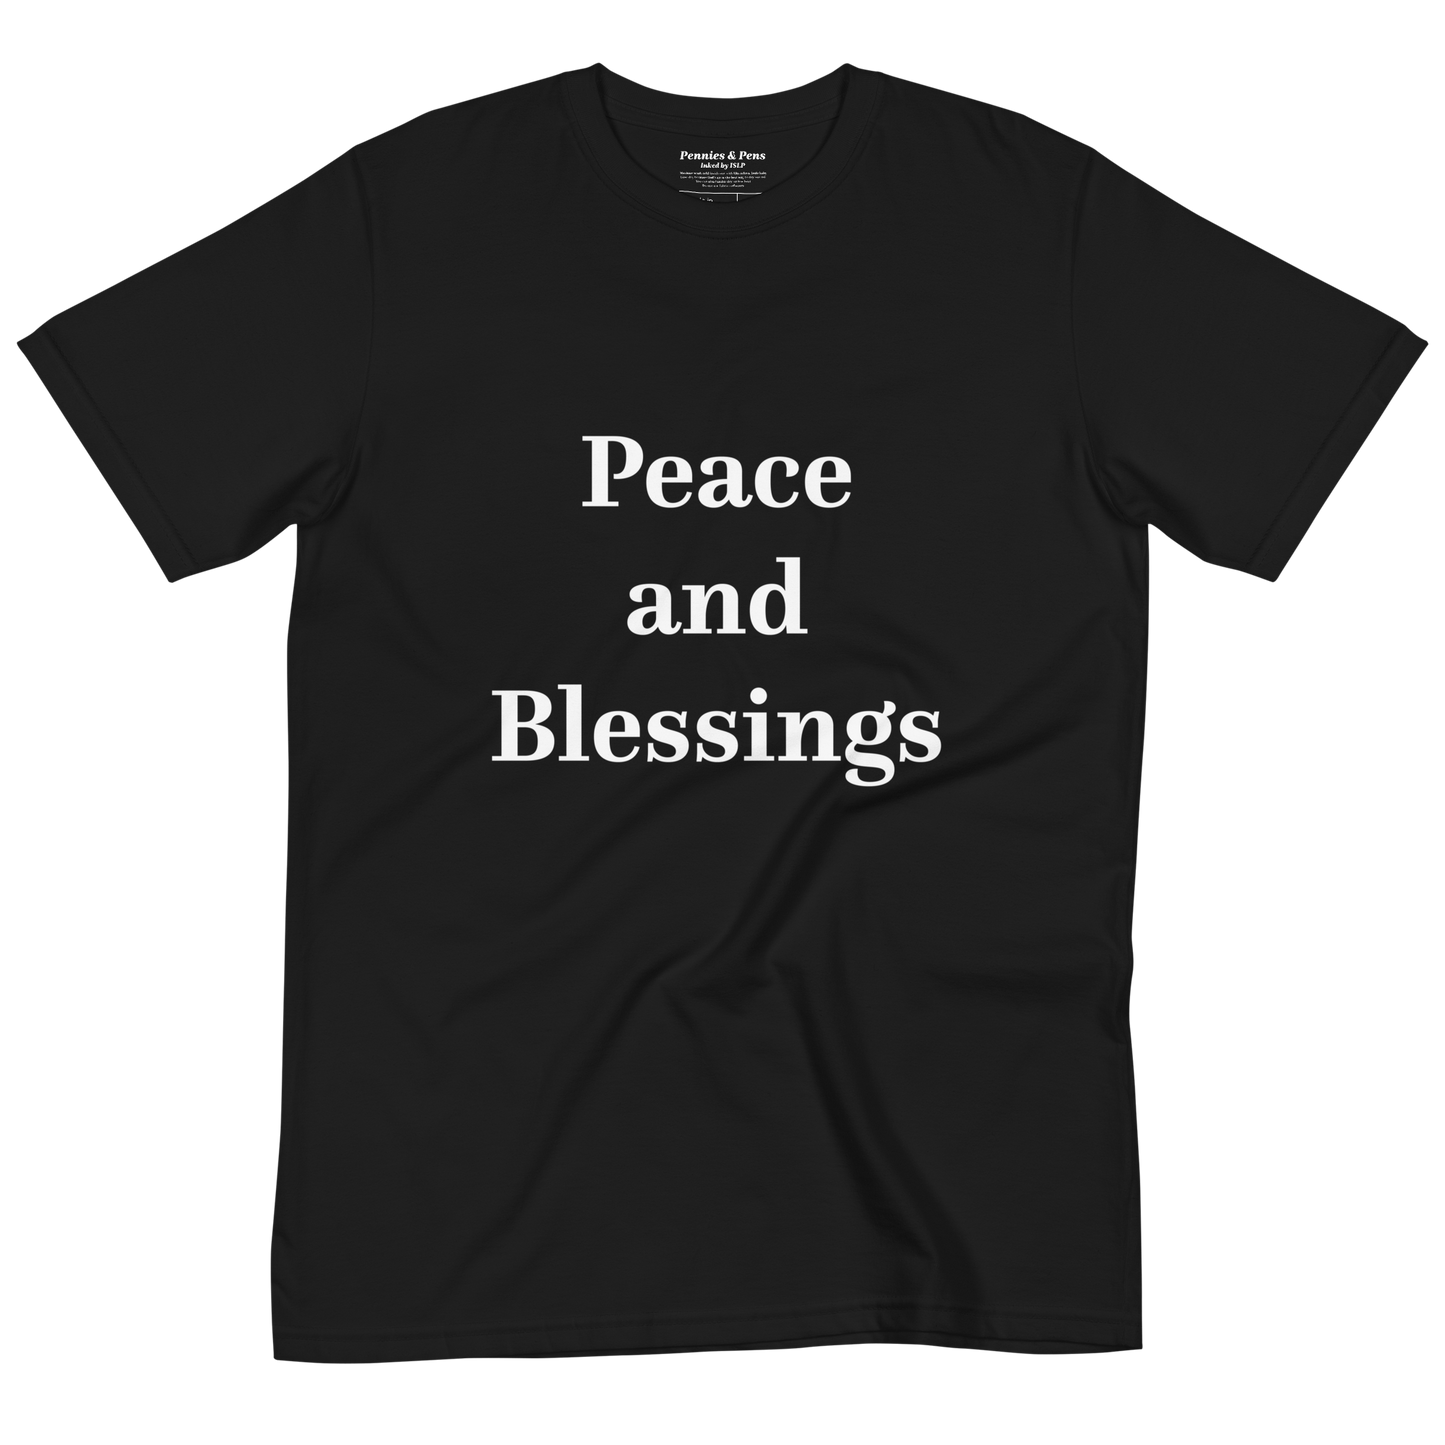 Peace and Blessings T-Shirt